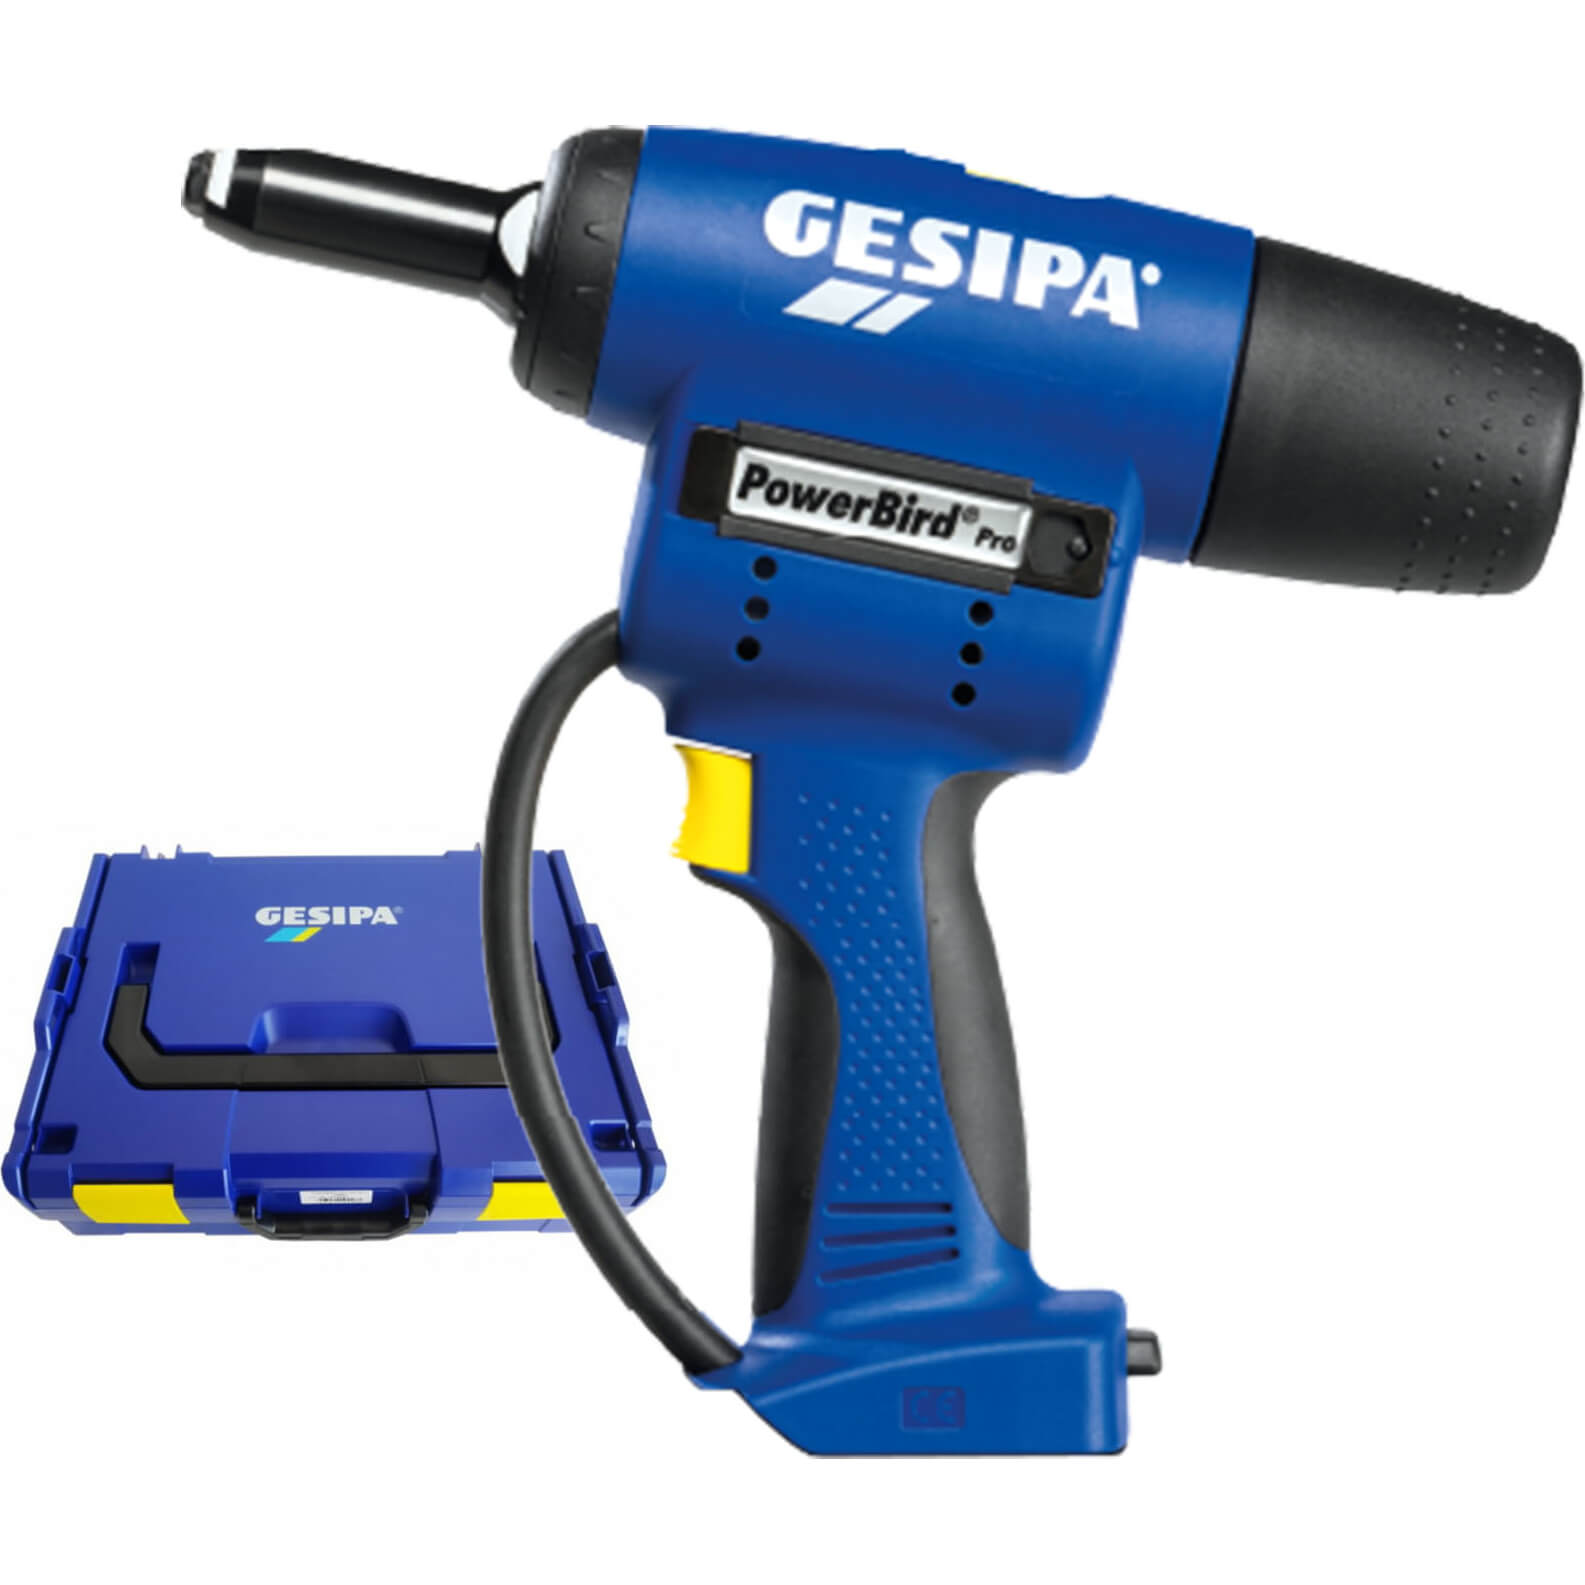 Photo of Gesipa Powerbird Pro Gold Edition Cordless Riveter No Batteries No Charger Case